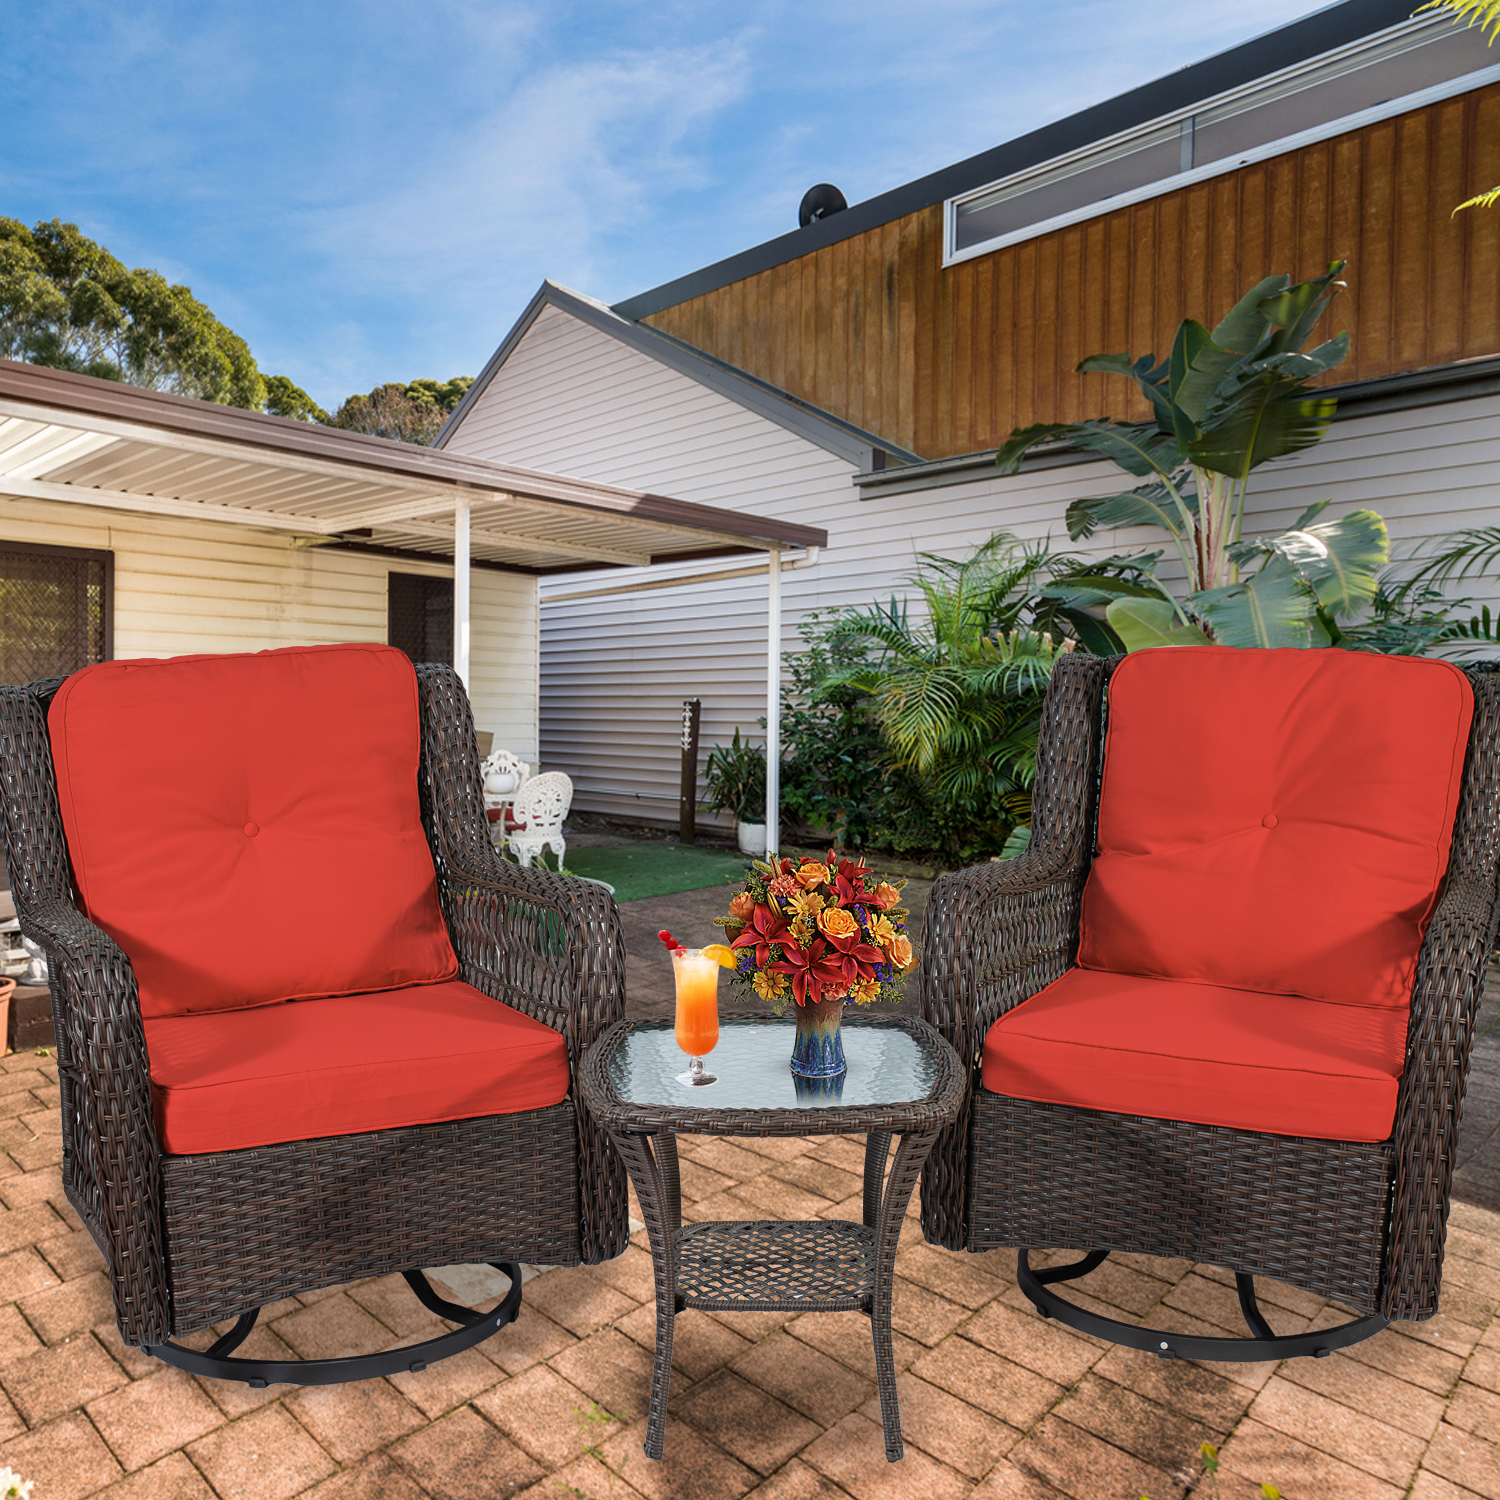 3-Piece Rattan Wicker Stainless Chat Set with Swivel Rocking Chairs Coffee Table for Indoor Outdoor Space Deck Porch Patio Conversation Bistro Set Rust - image 3 of 19